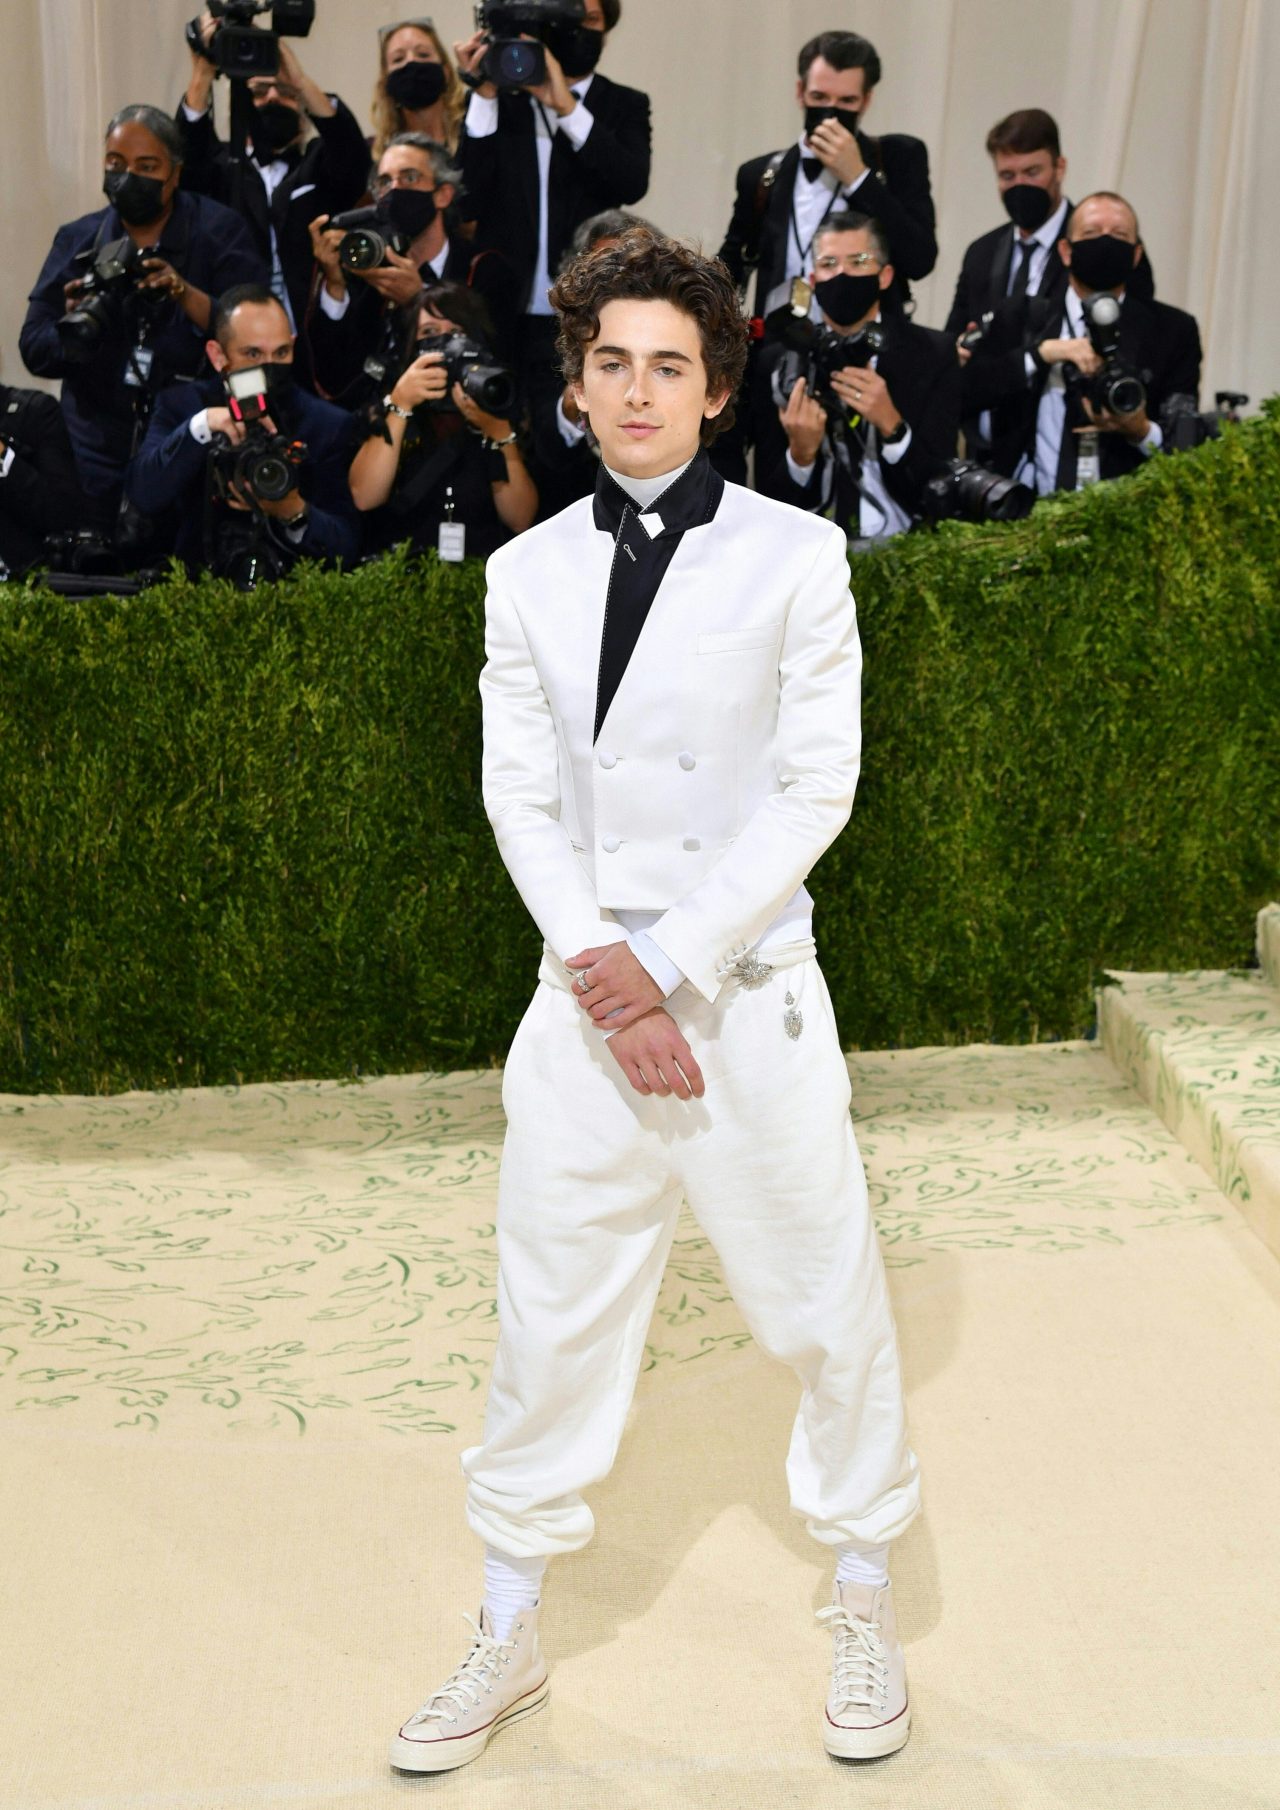 TOPSHOT - US-French actor Timothee Chalamet arrives for the 2021 Met Gala at the Metropolitan Museum of Art on September 13, 2021 in New York. - This year's Met Gala has a distinctively youthful imprint, hosted by singer Billie Eilish, actor Timothee Chalamet, poet Amanda Gorman and tennis star Naomi Osaka, none of them older than 25. The 2021 theme is "In America: A Lexicon of Fashion." (Photo by ANGELA  WEISS / AFP) (Photo by ANGELA  WEISS/AFP via Getty Images)